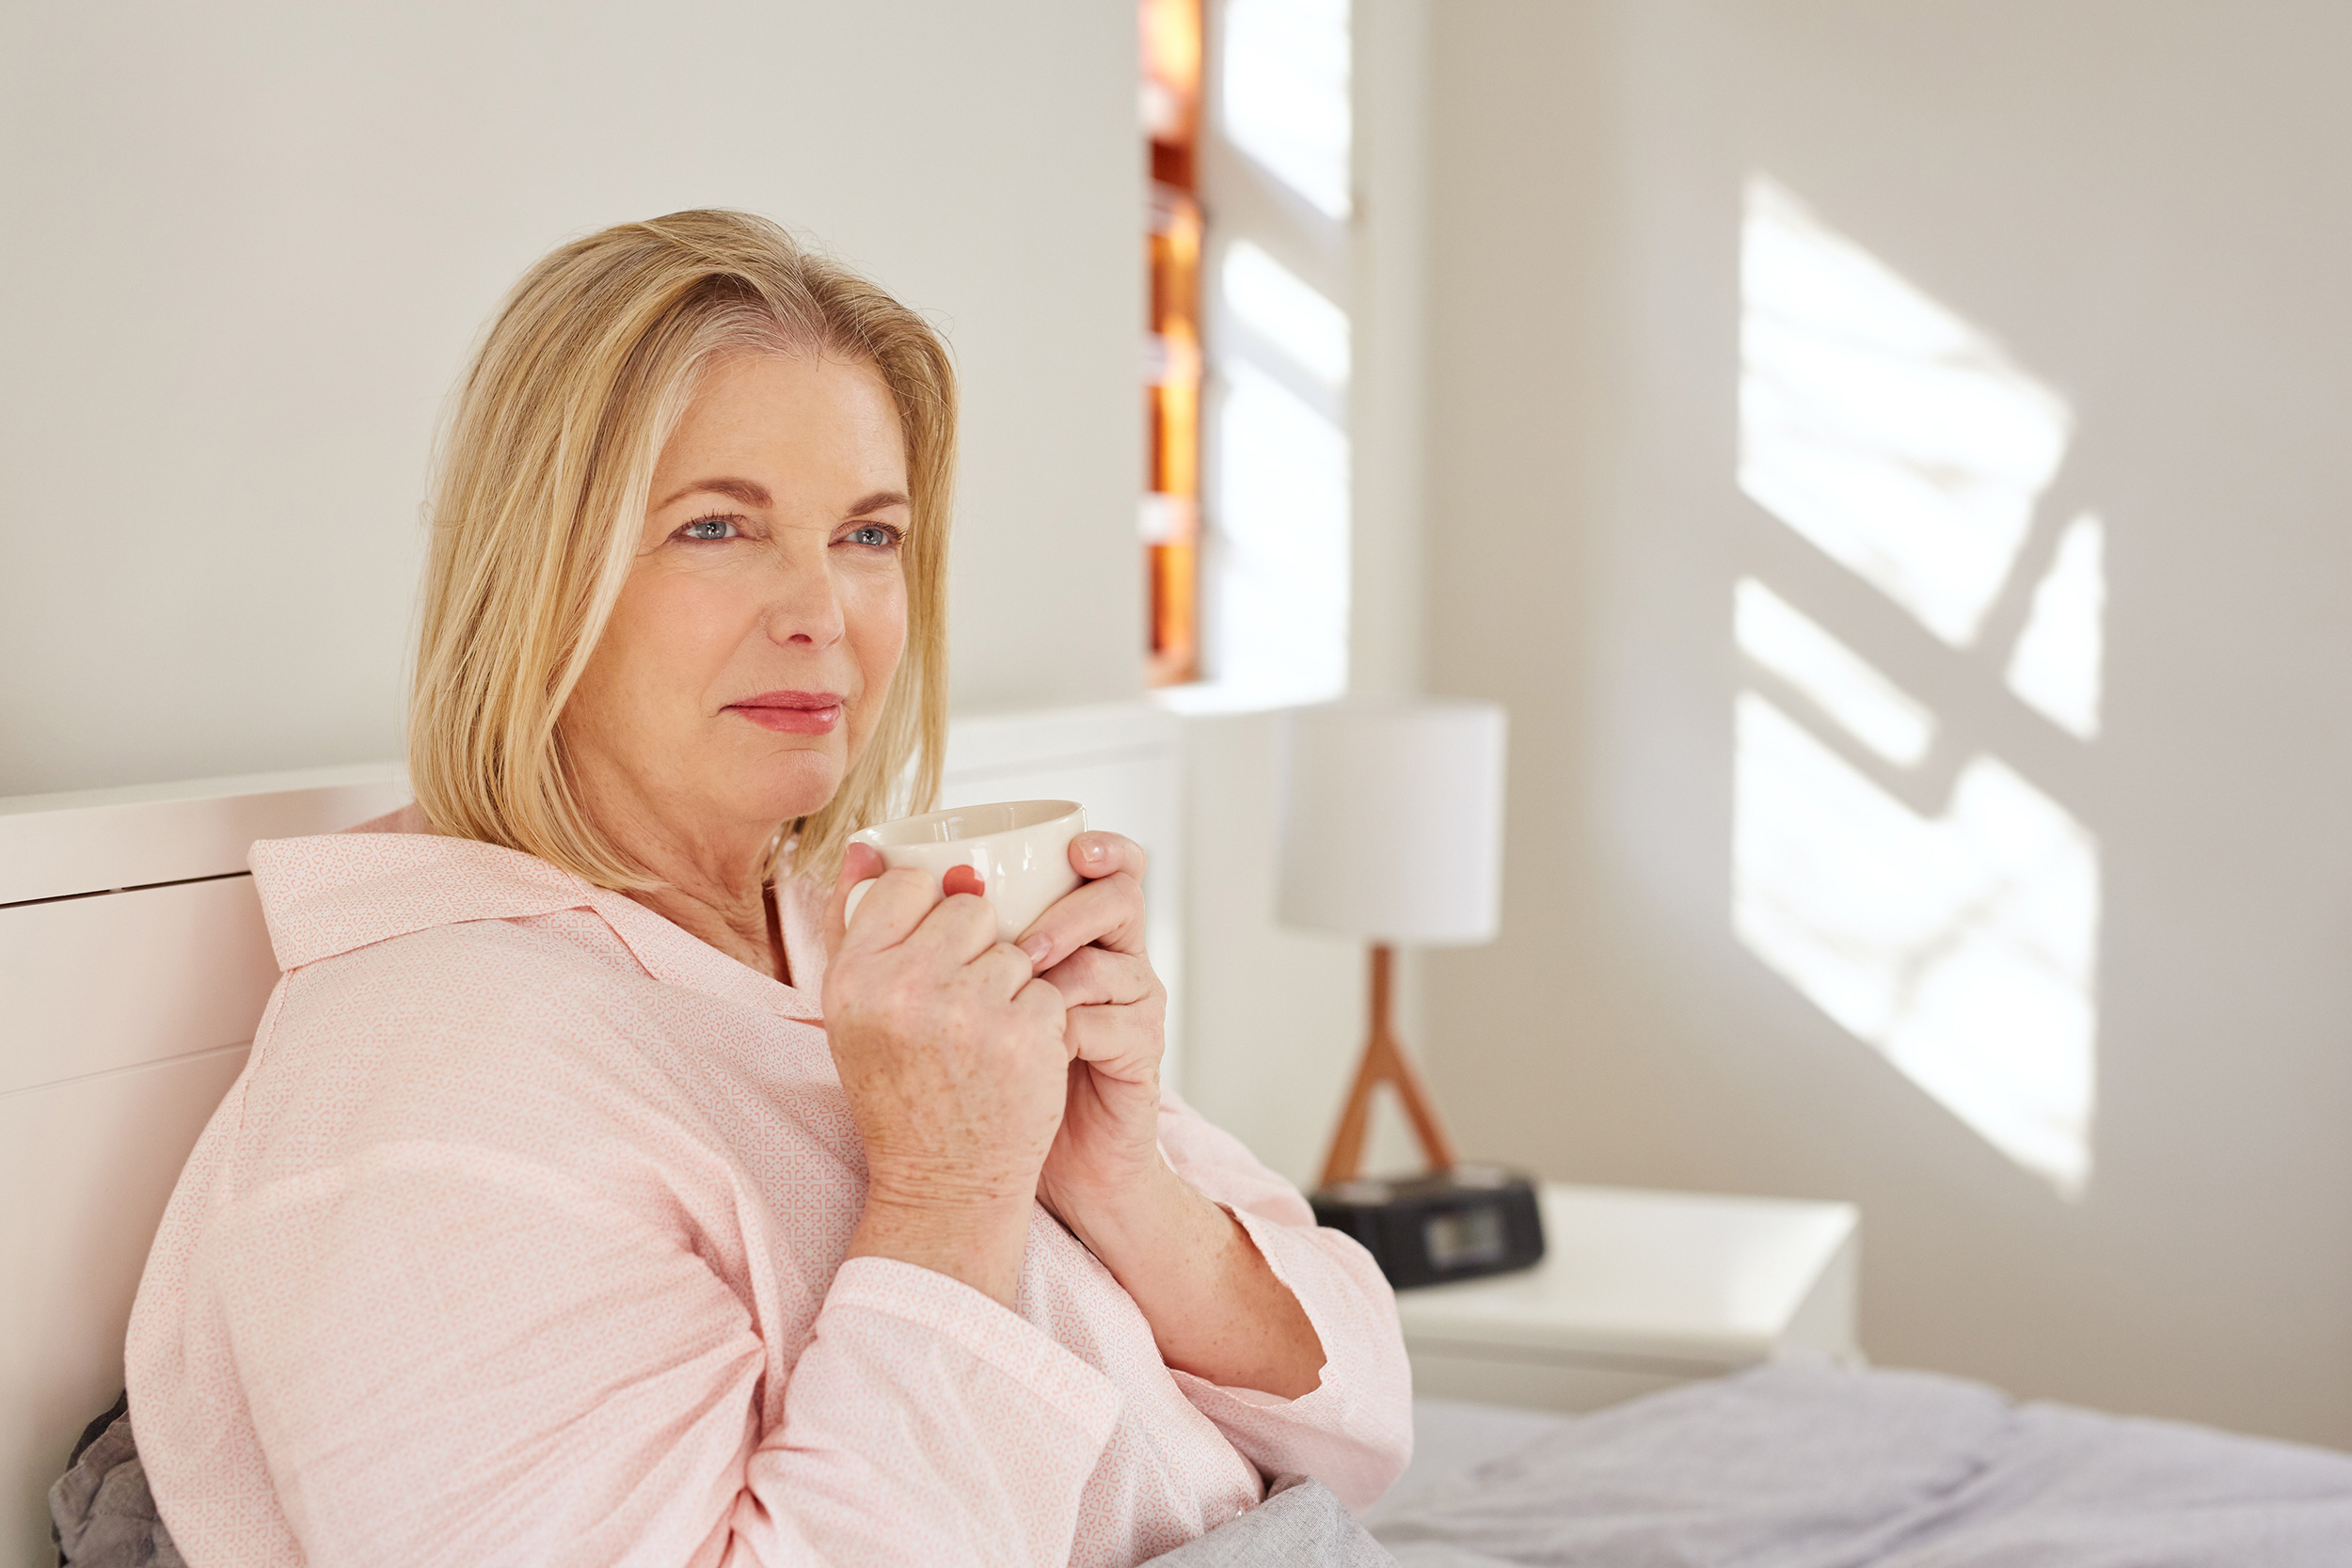 Sitting in her bed, a woman holds her coffee mug and looks up. Top reasons you may be denied Social Security Disability include health and employment situations that don't qualify for benefits.